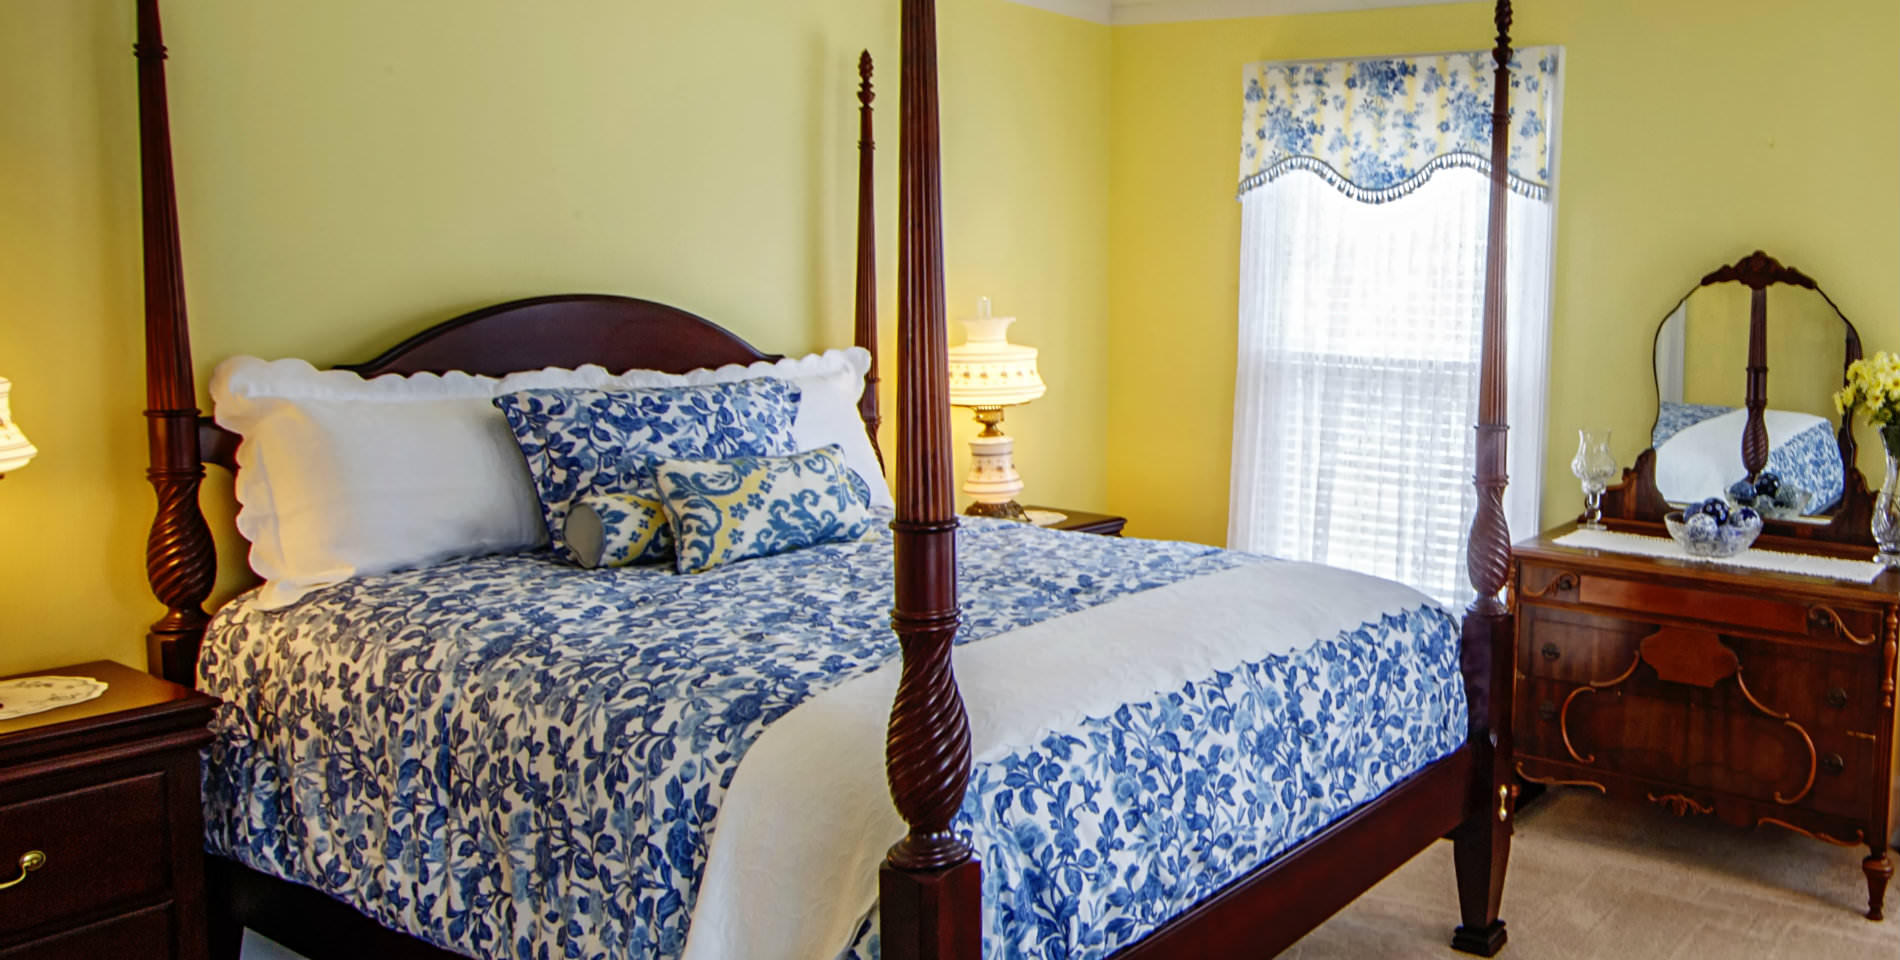 The bed with a blue a white floral print comforter and throw pillows and plush white pillows by the headboard. 